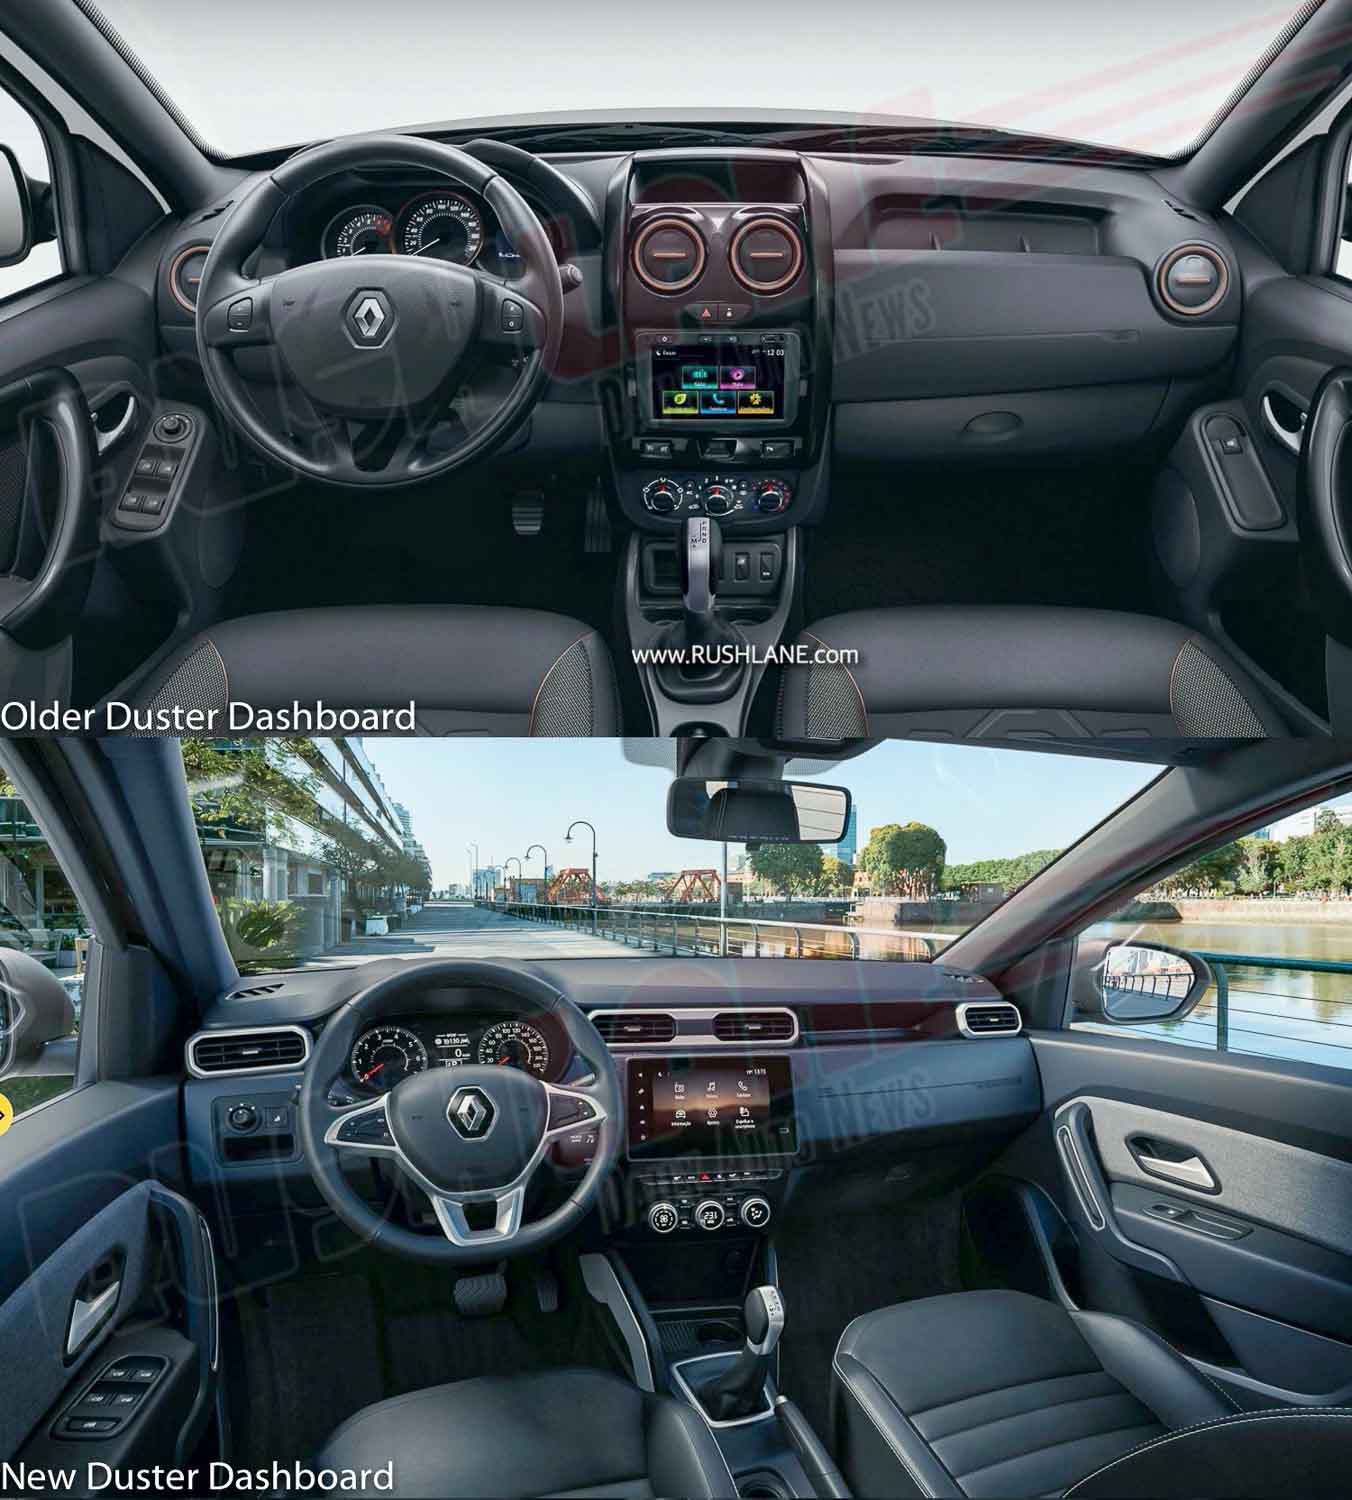 Renault Duster Interior Review [Indian Market]